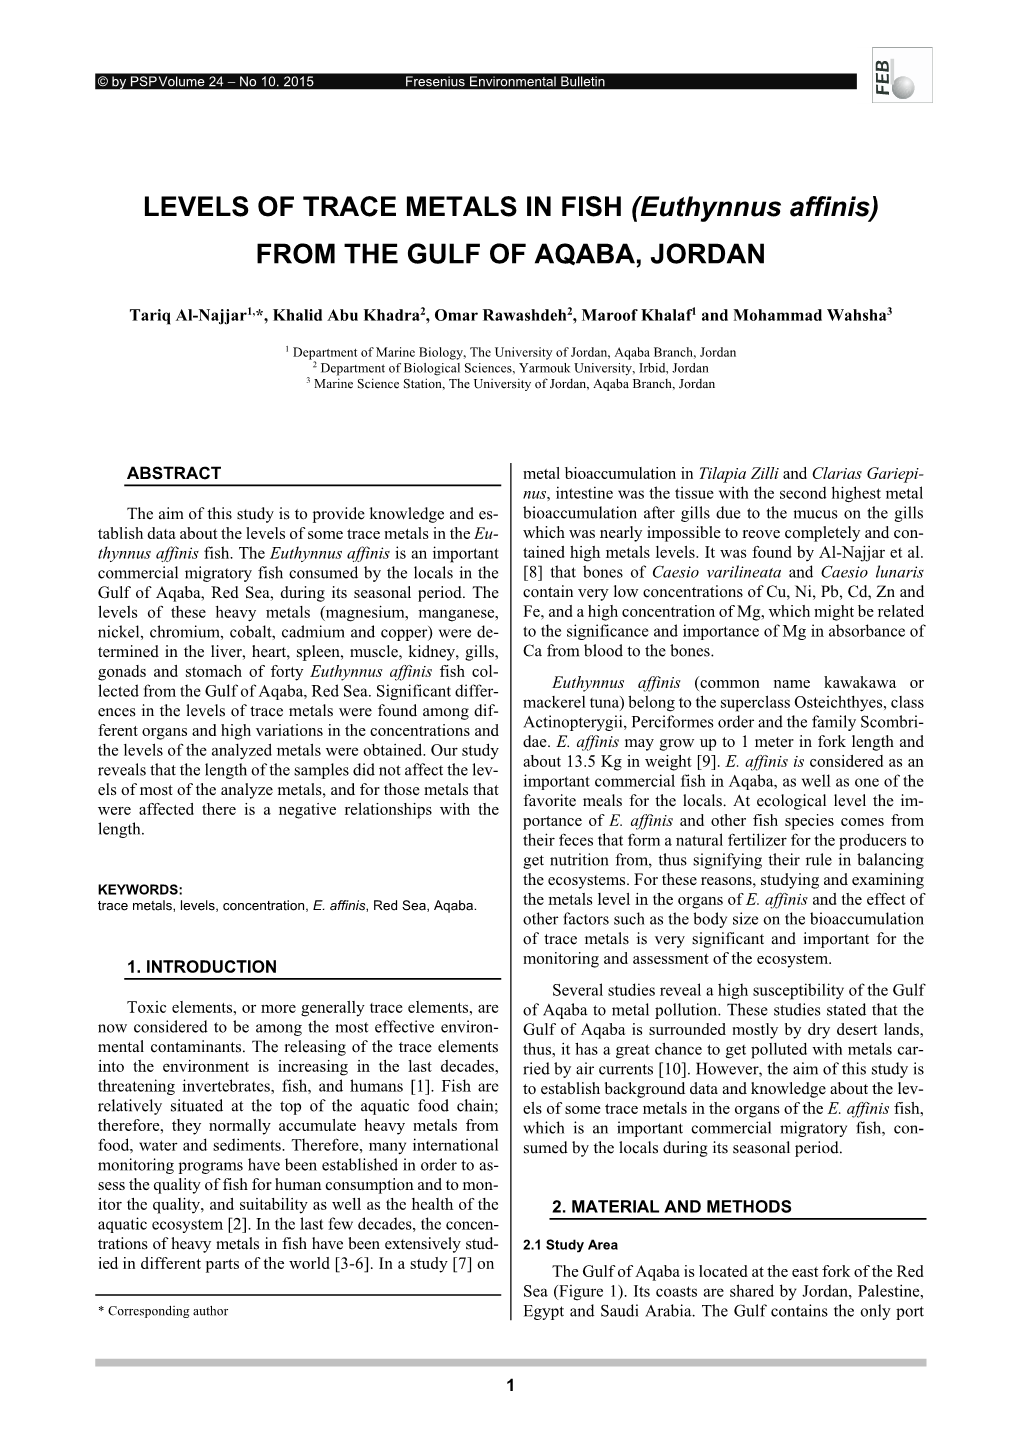 LEVELS of TRACE METALS in FISH (Euthynnus Affinis) from the GULF of AQABA, JORDAN